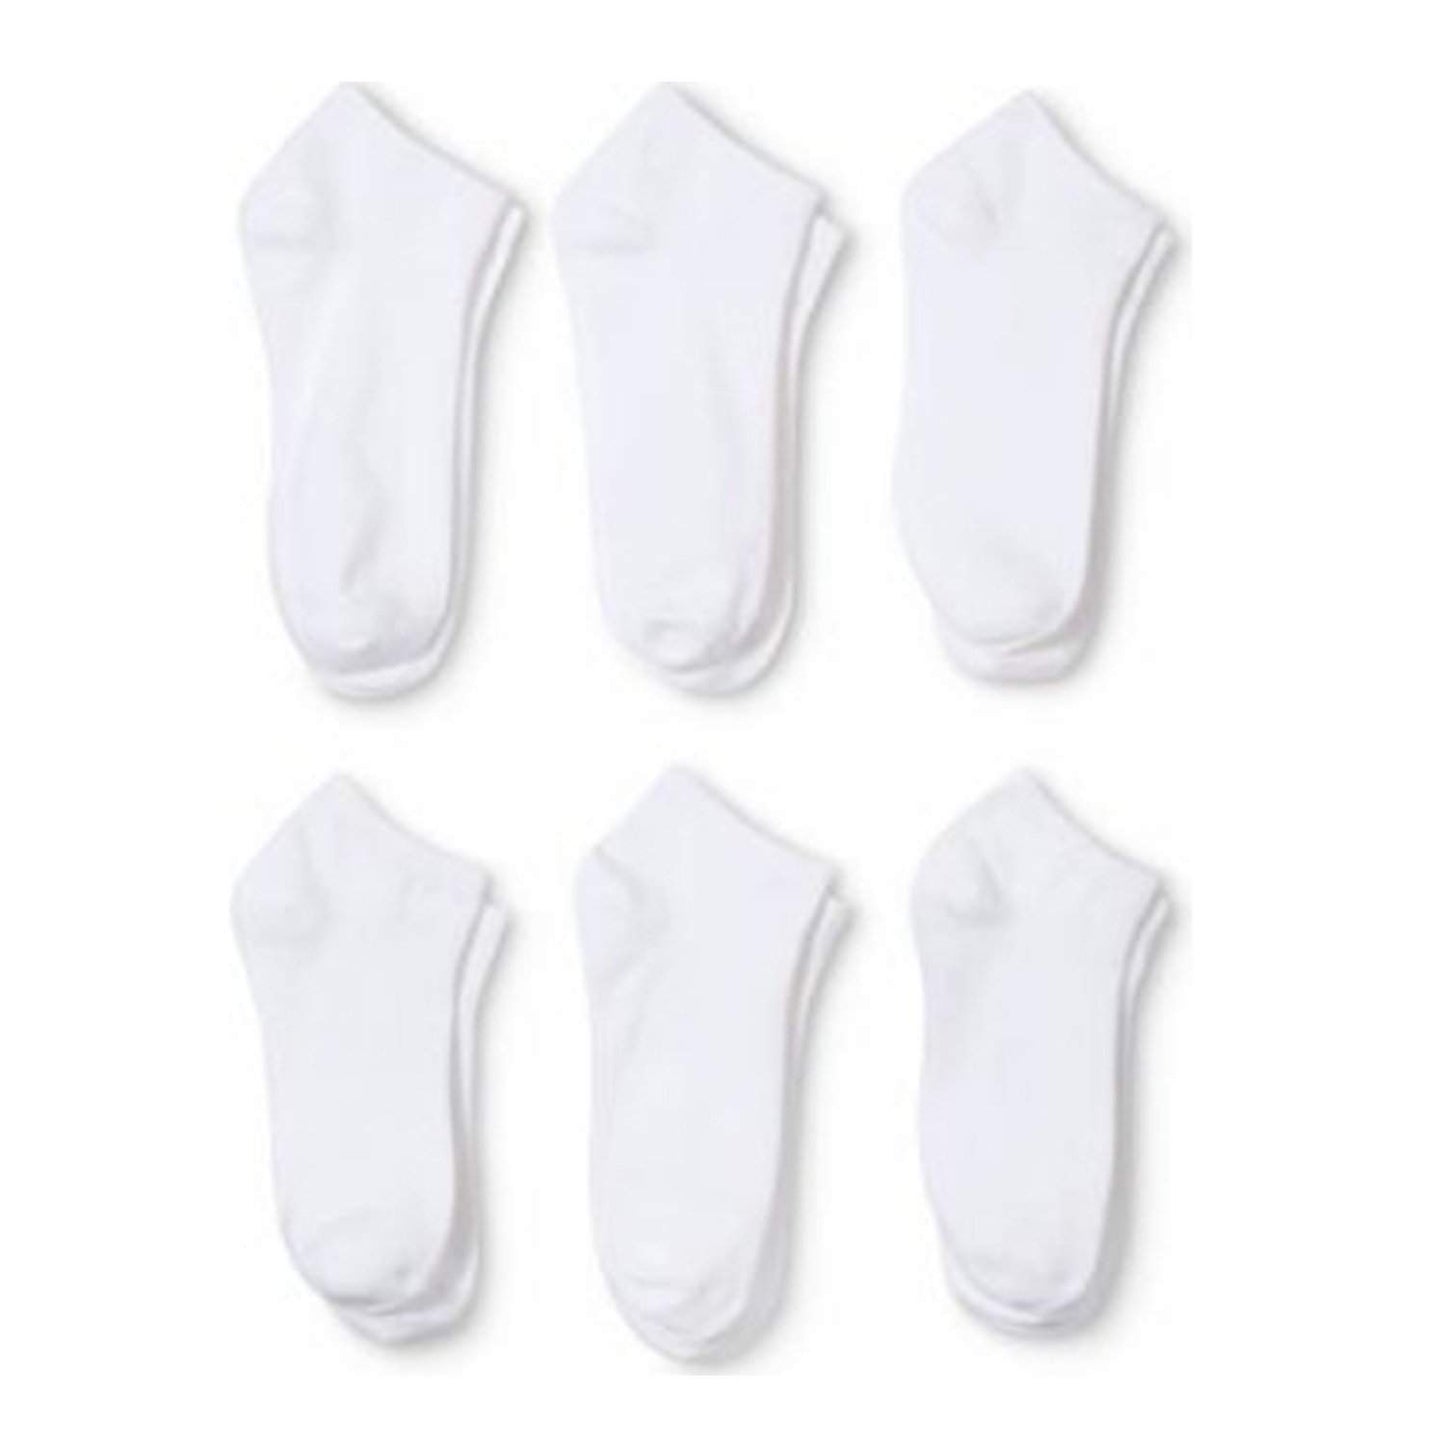 Daily Basic Cotton Ankle Socks  Low Cut, No Show Men and Women Socks - 36 Pack